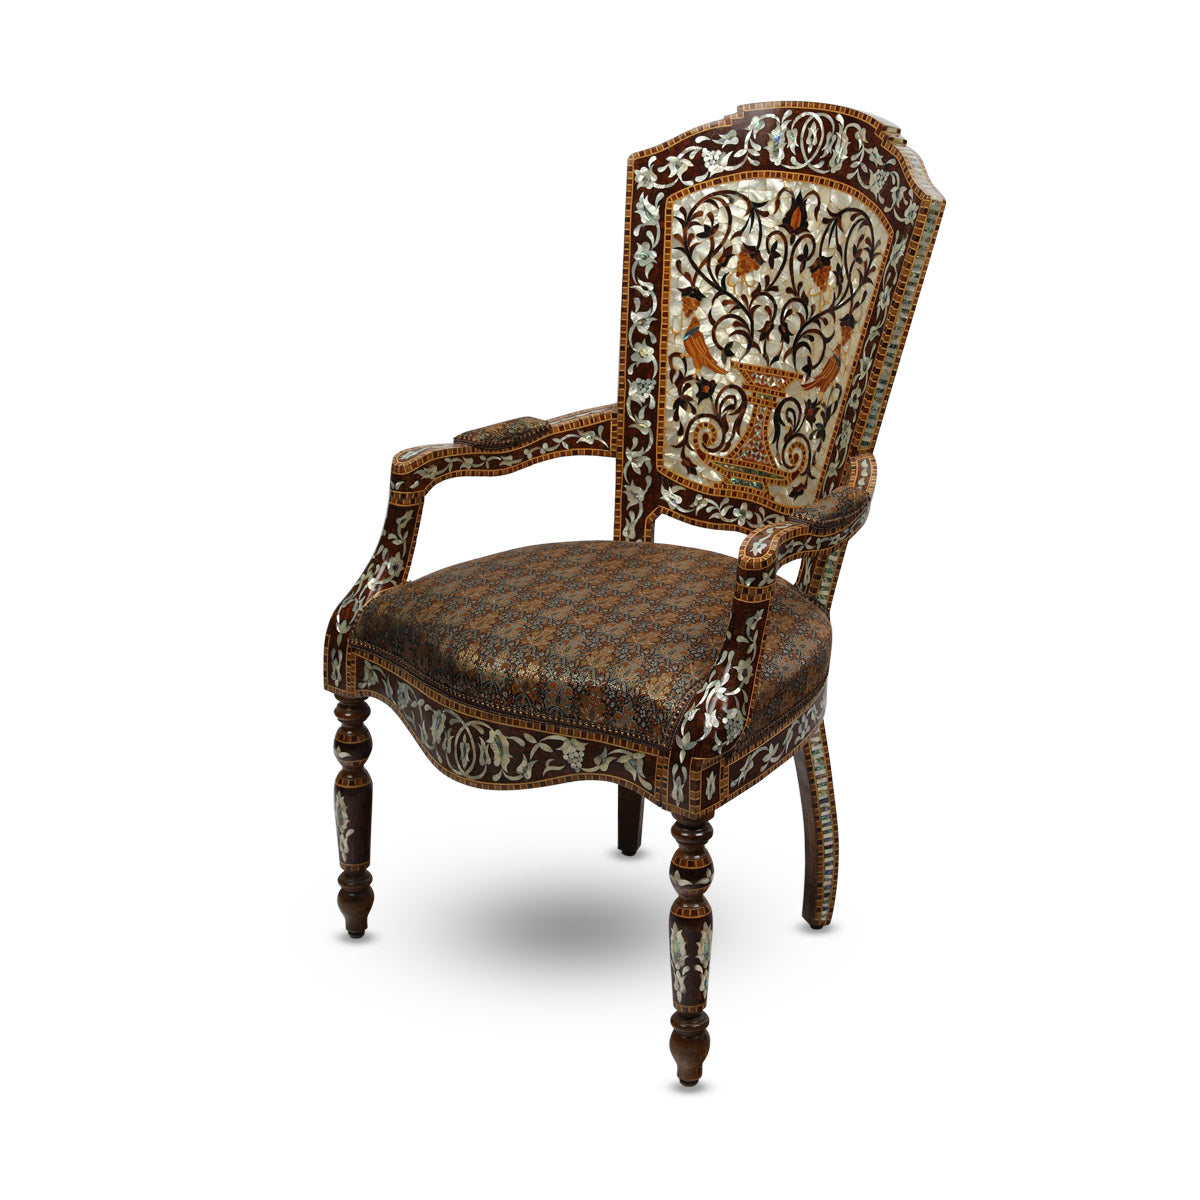 Angled Side View of Wooden Mother of Pearl Inlaid Arabic Armchair